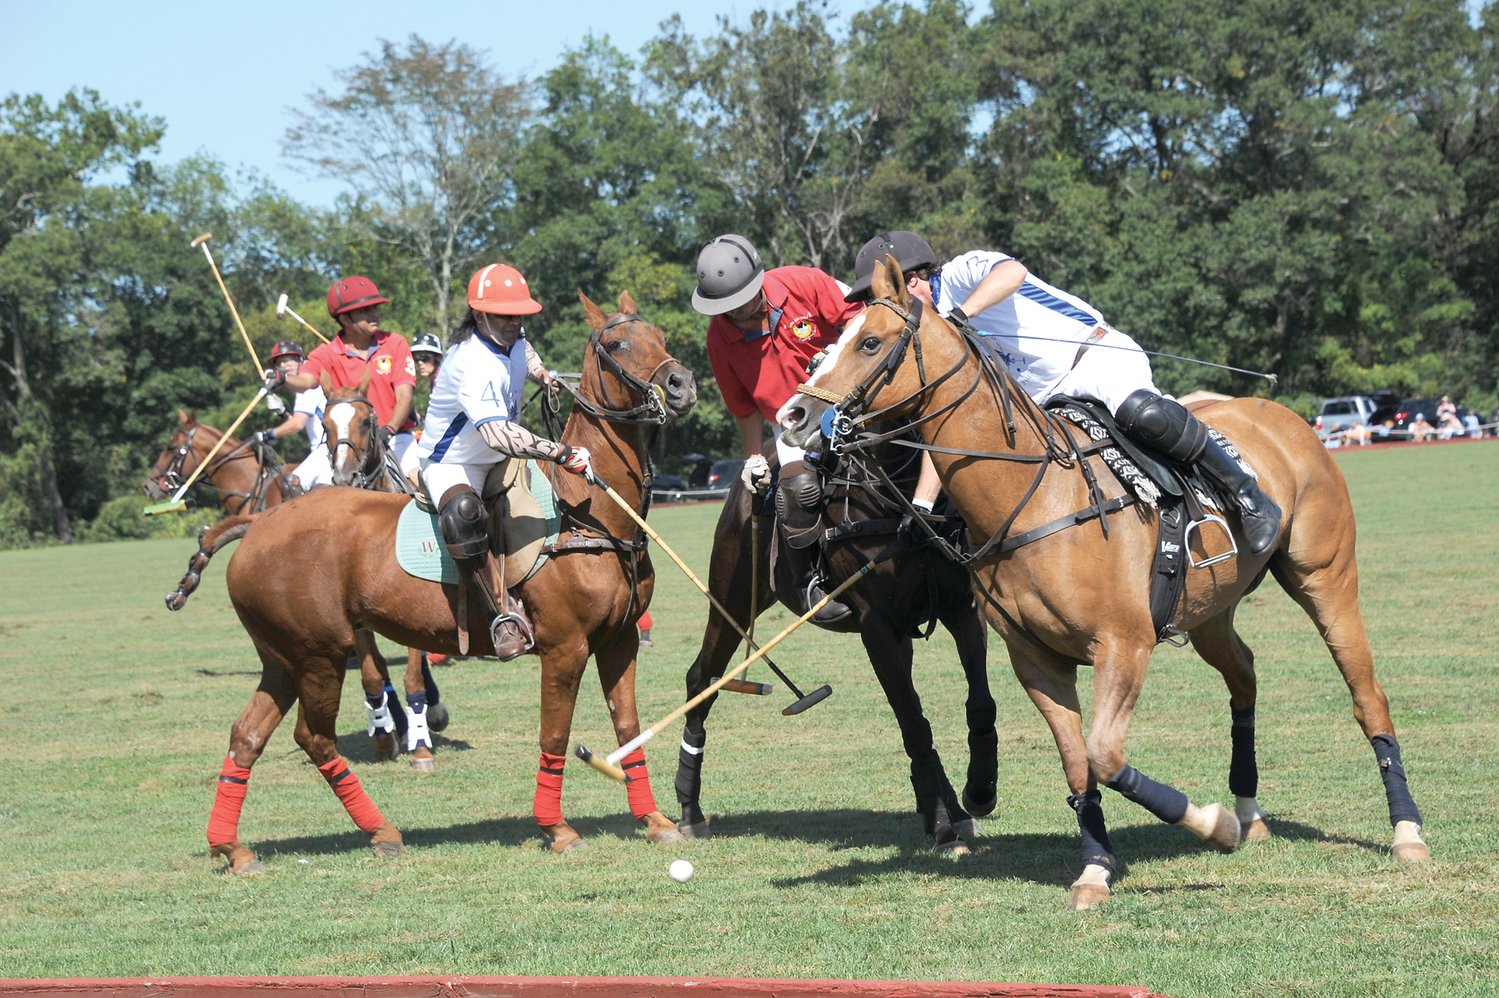 Polo players battle for control of the ball. Photograph by Carol Ross.